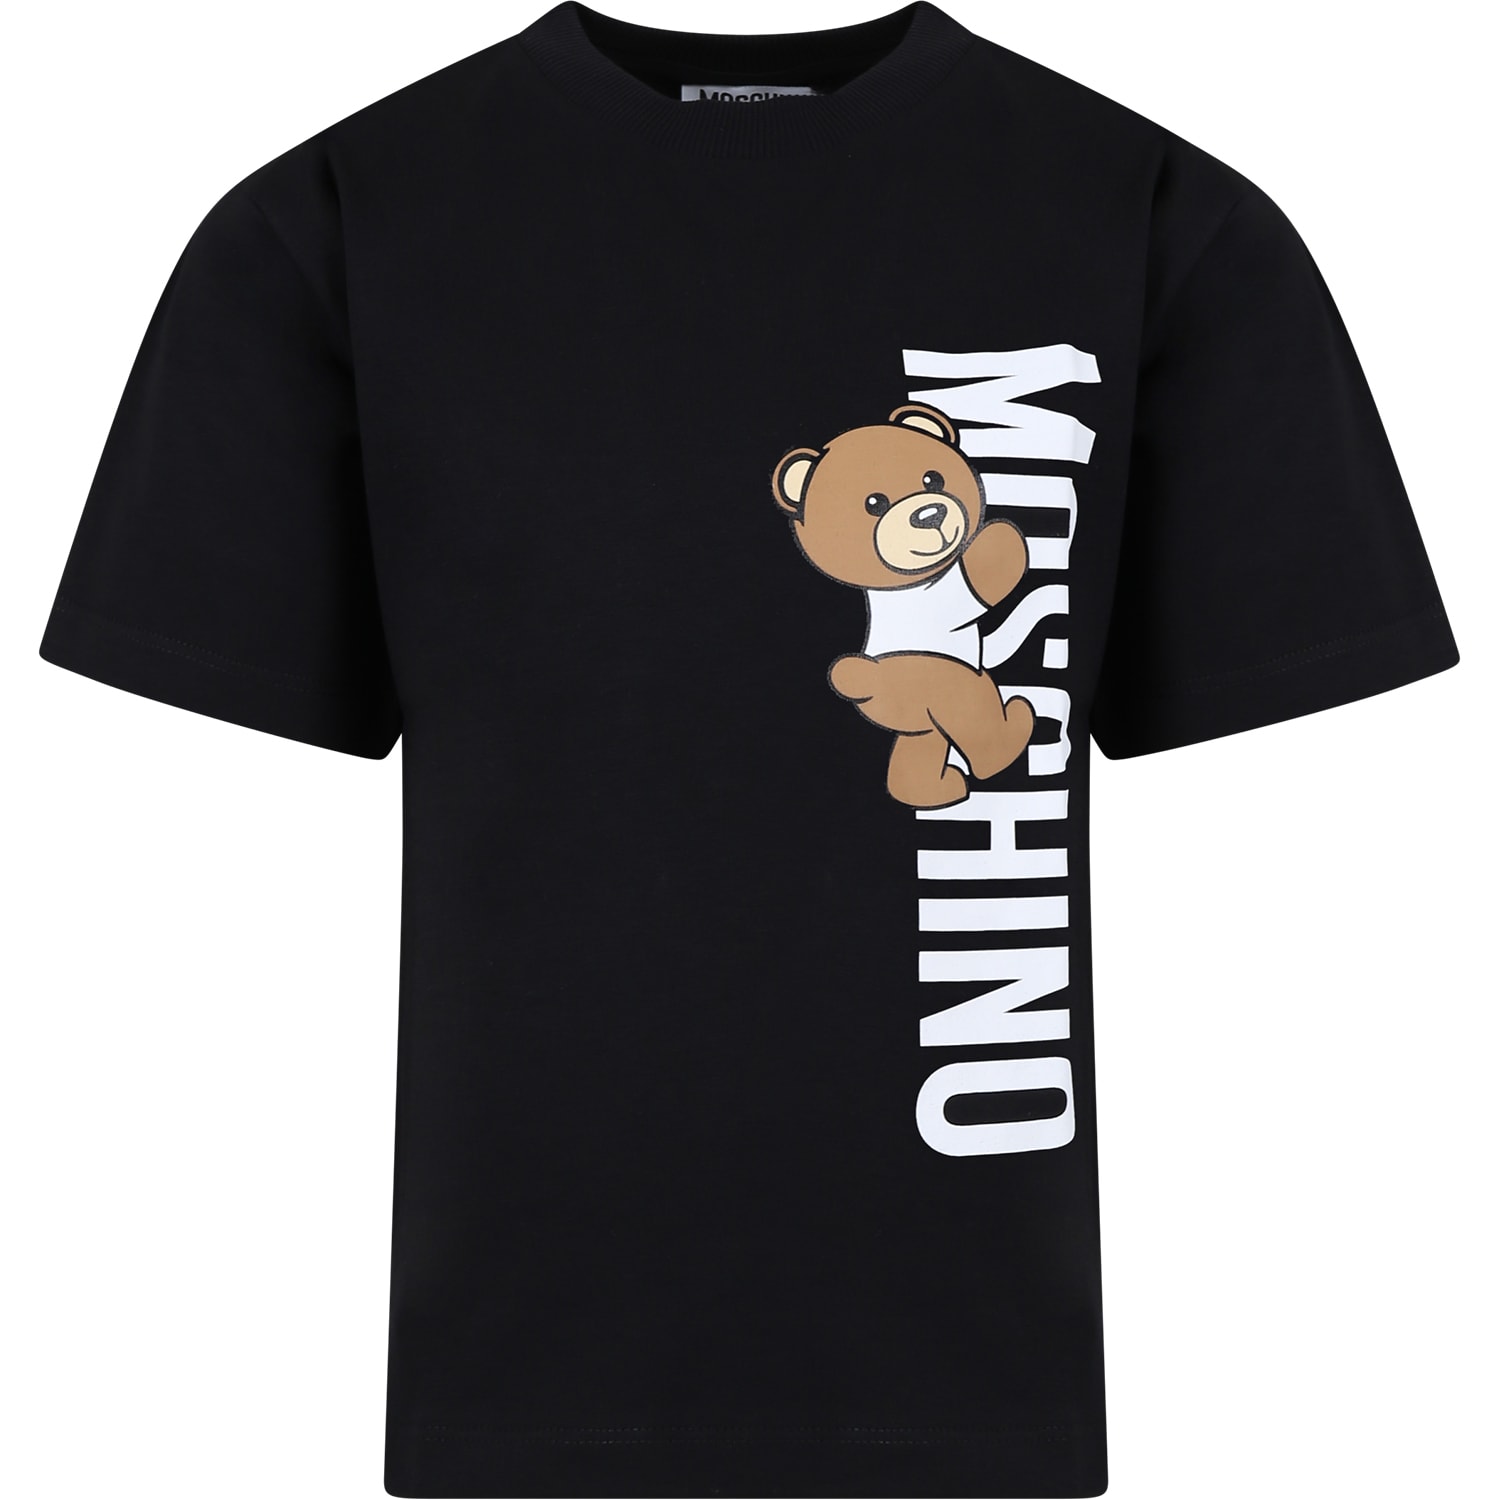 MOSCHINO BLACK T-SHIRT FOR KIDS WITH TEDDY BEAR AND LOGO